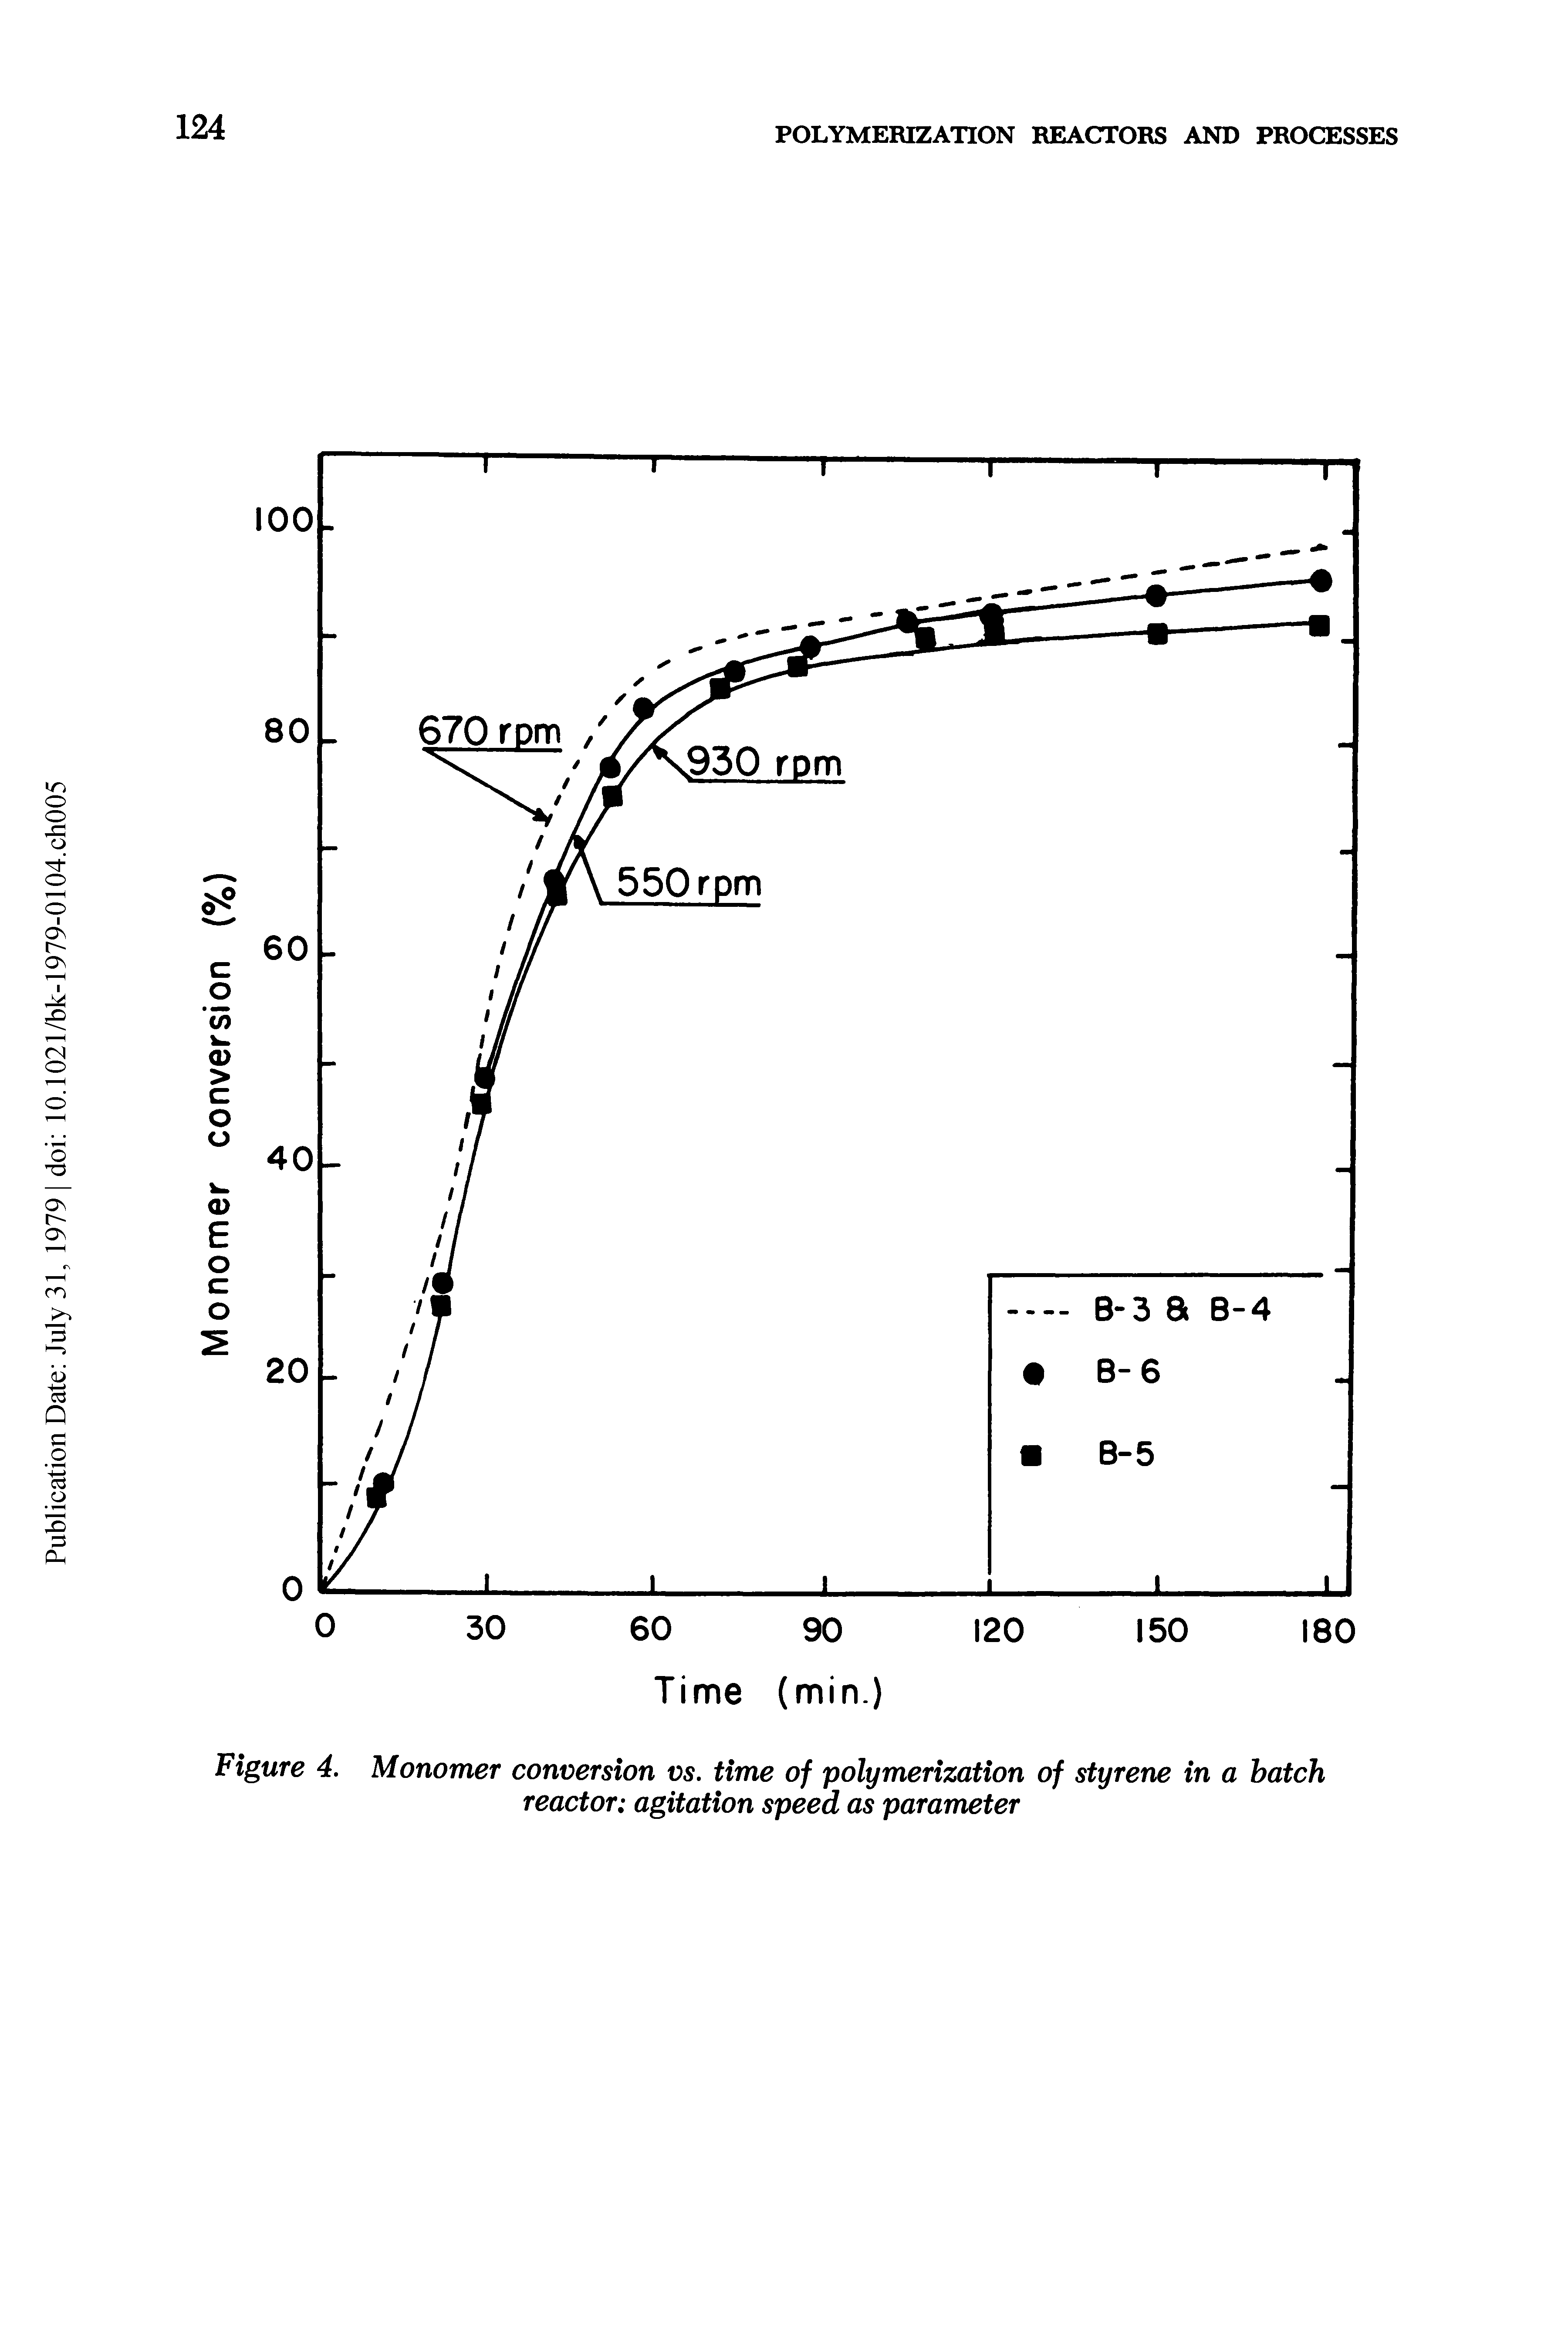 Figure 4. Monomer conversion vs. time of polymerization of styrene in a hatch reactor agitation speed as parameter...